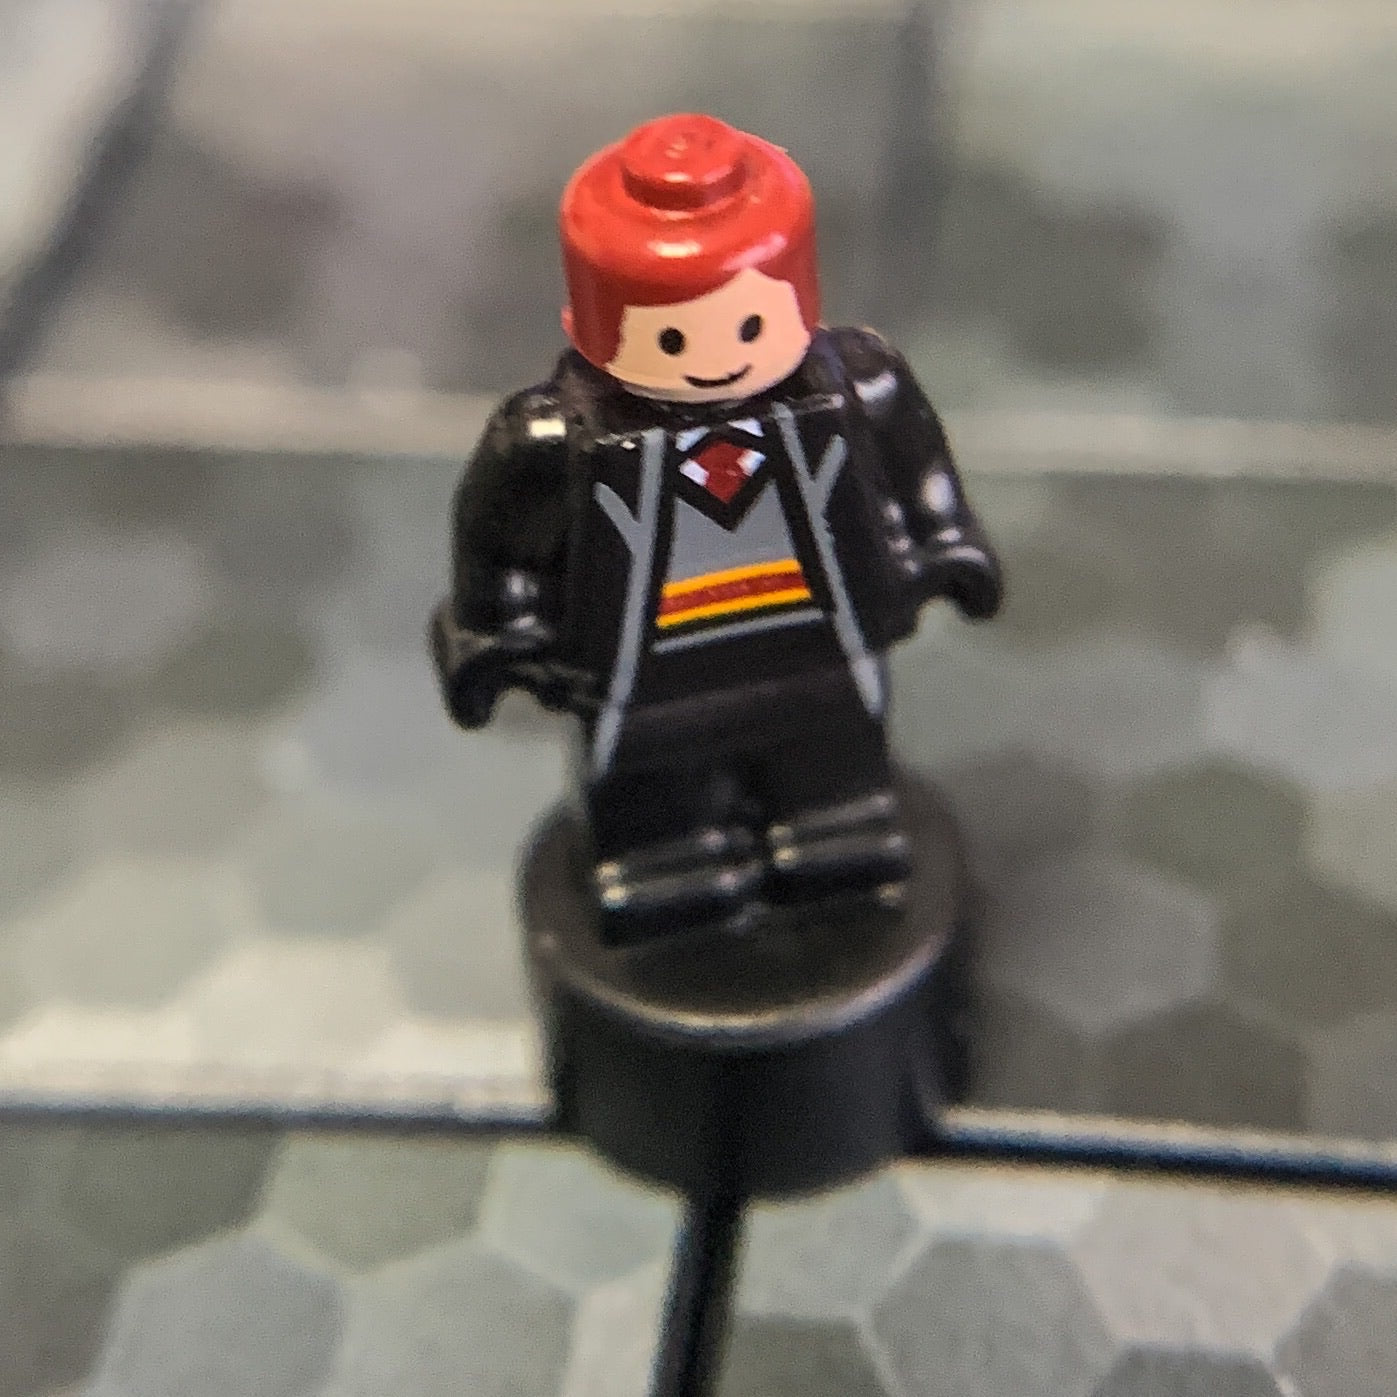 Gryffindor Student (Nano, Red Hair) - LEGO Harry Potter Minifigure (2018)